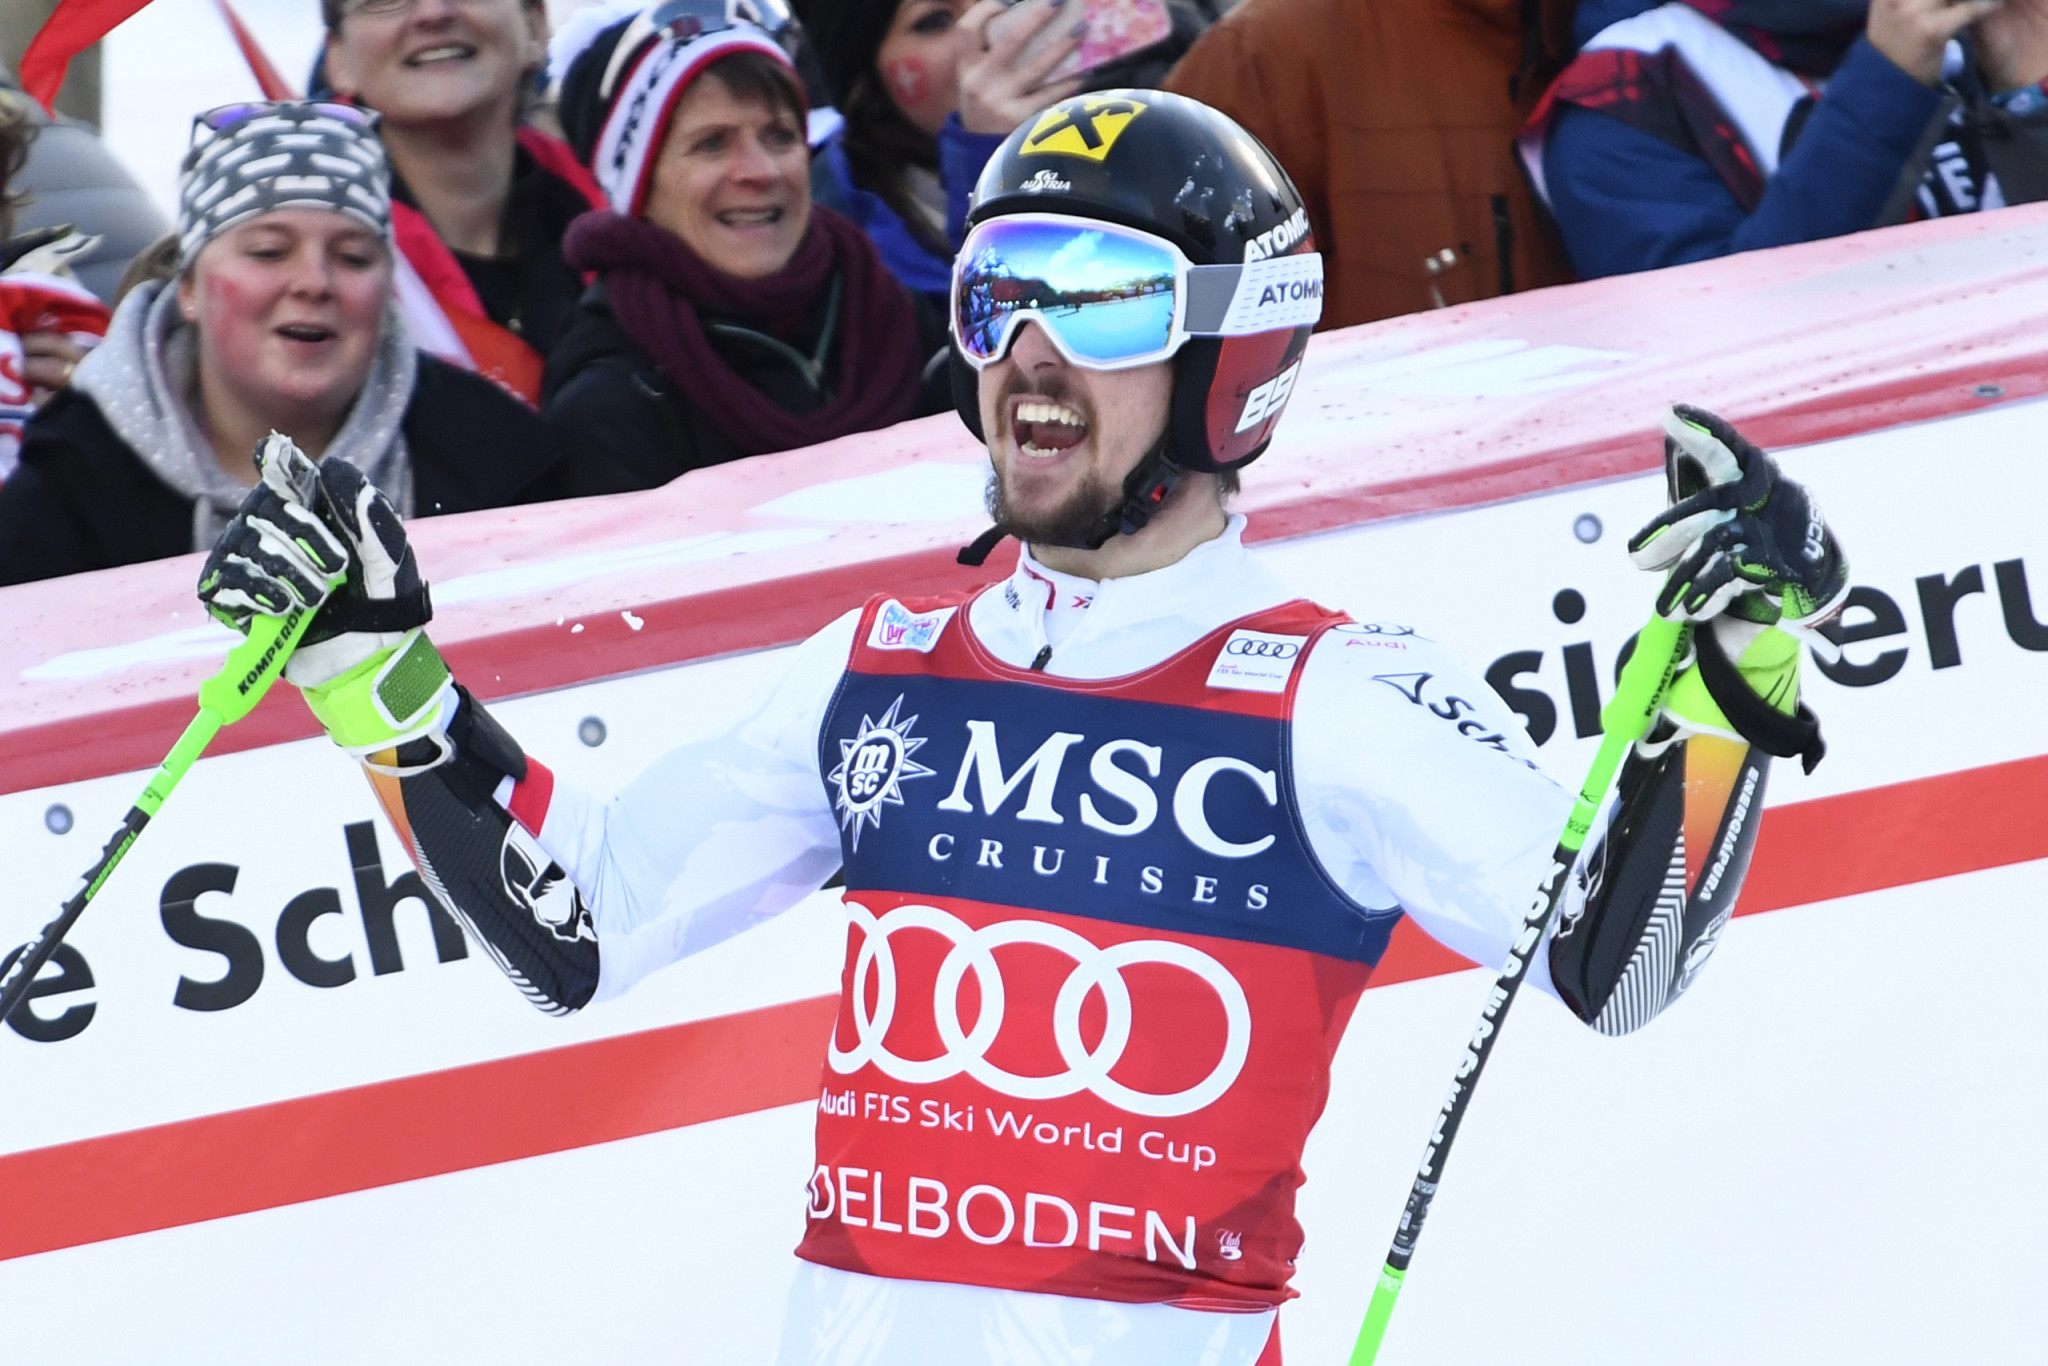 Hirscher and Shiffrin continue excellent form at FIS Alpine Skiing World Cup